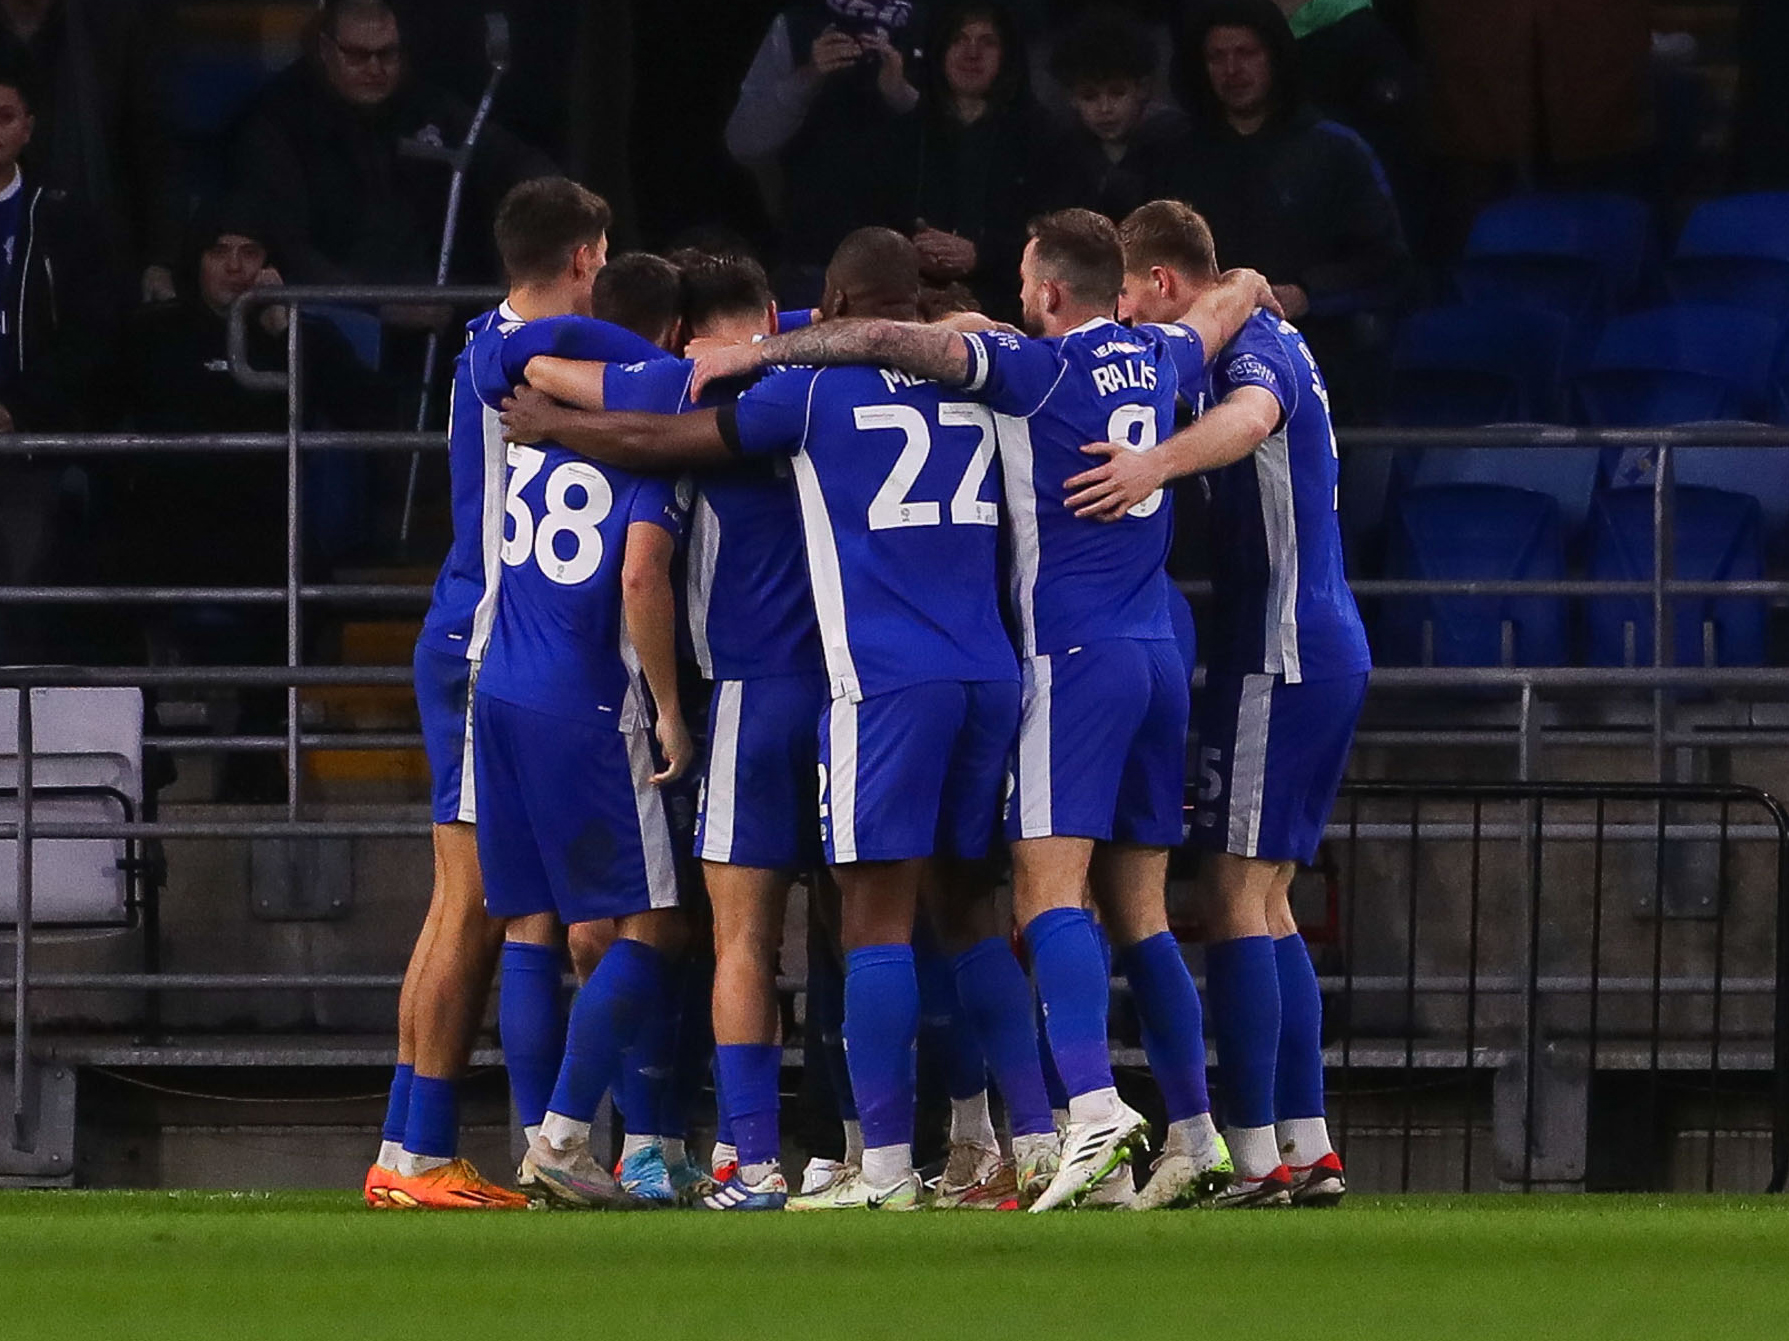 Cardiff City players in a huddle after scoring a goal